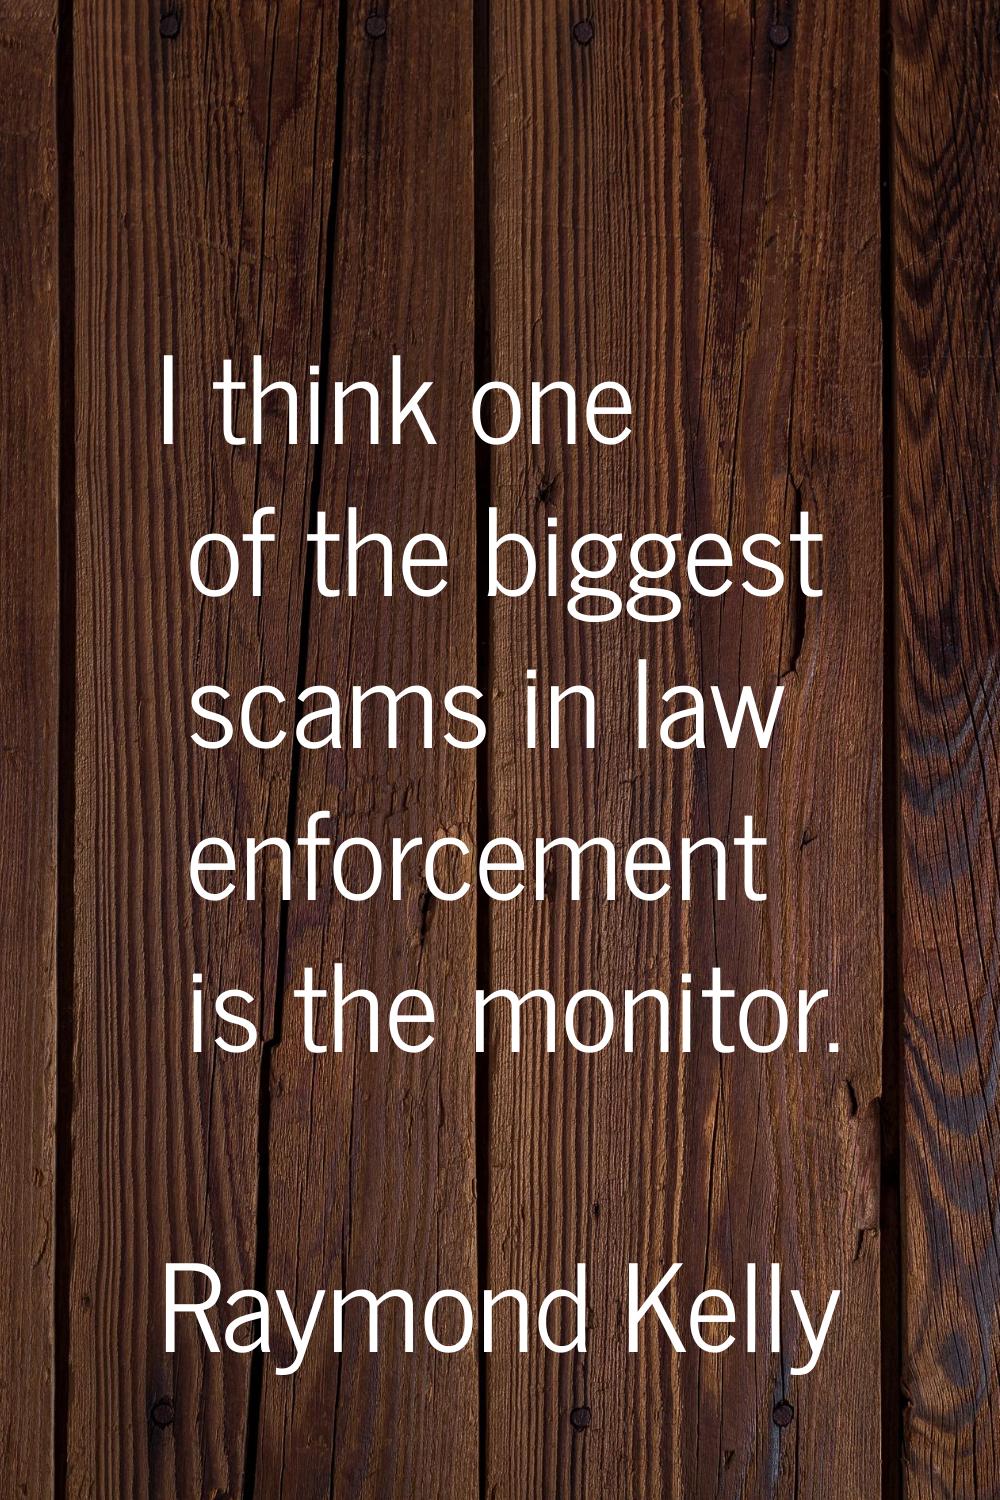 I think one of the biggest scams in law enforcement is the monitor.